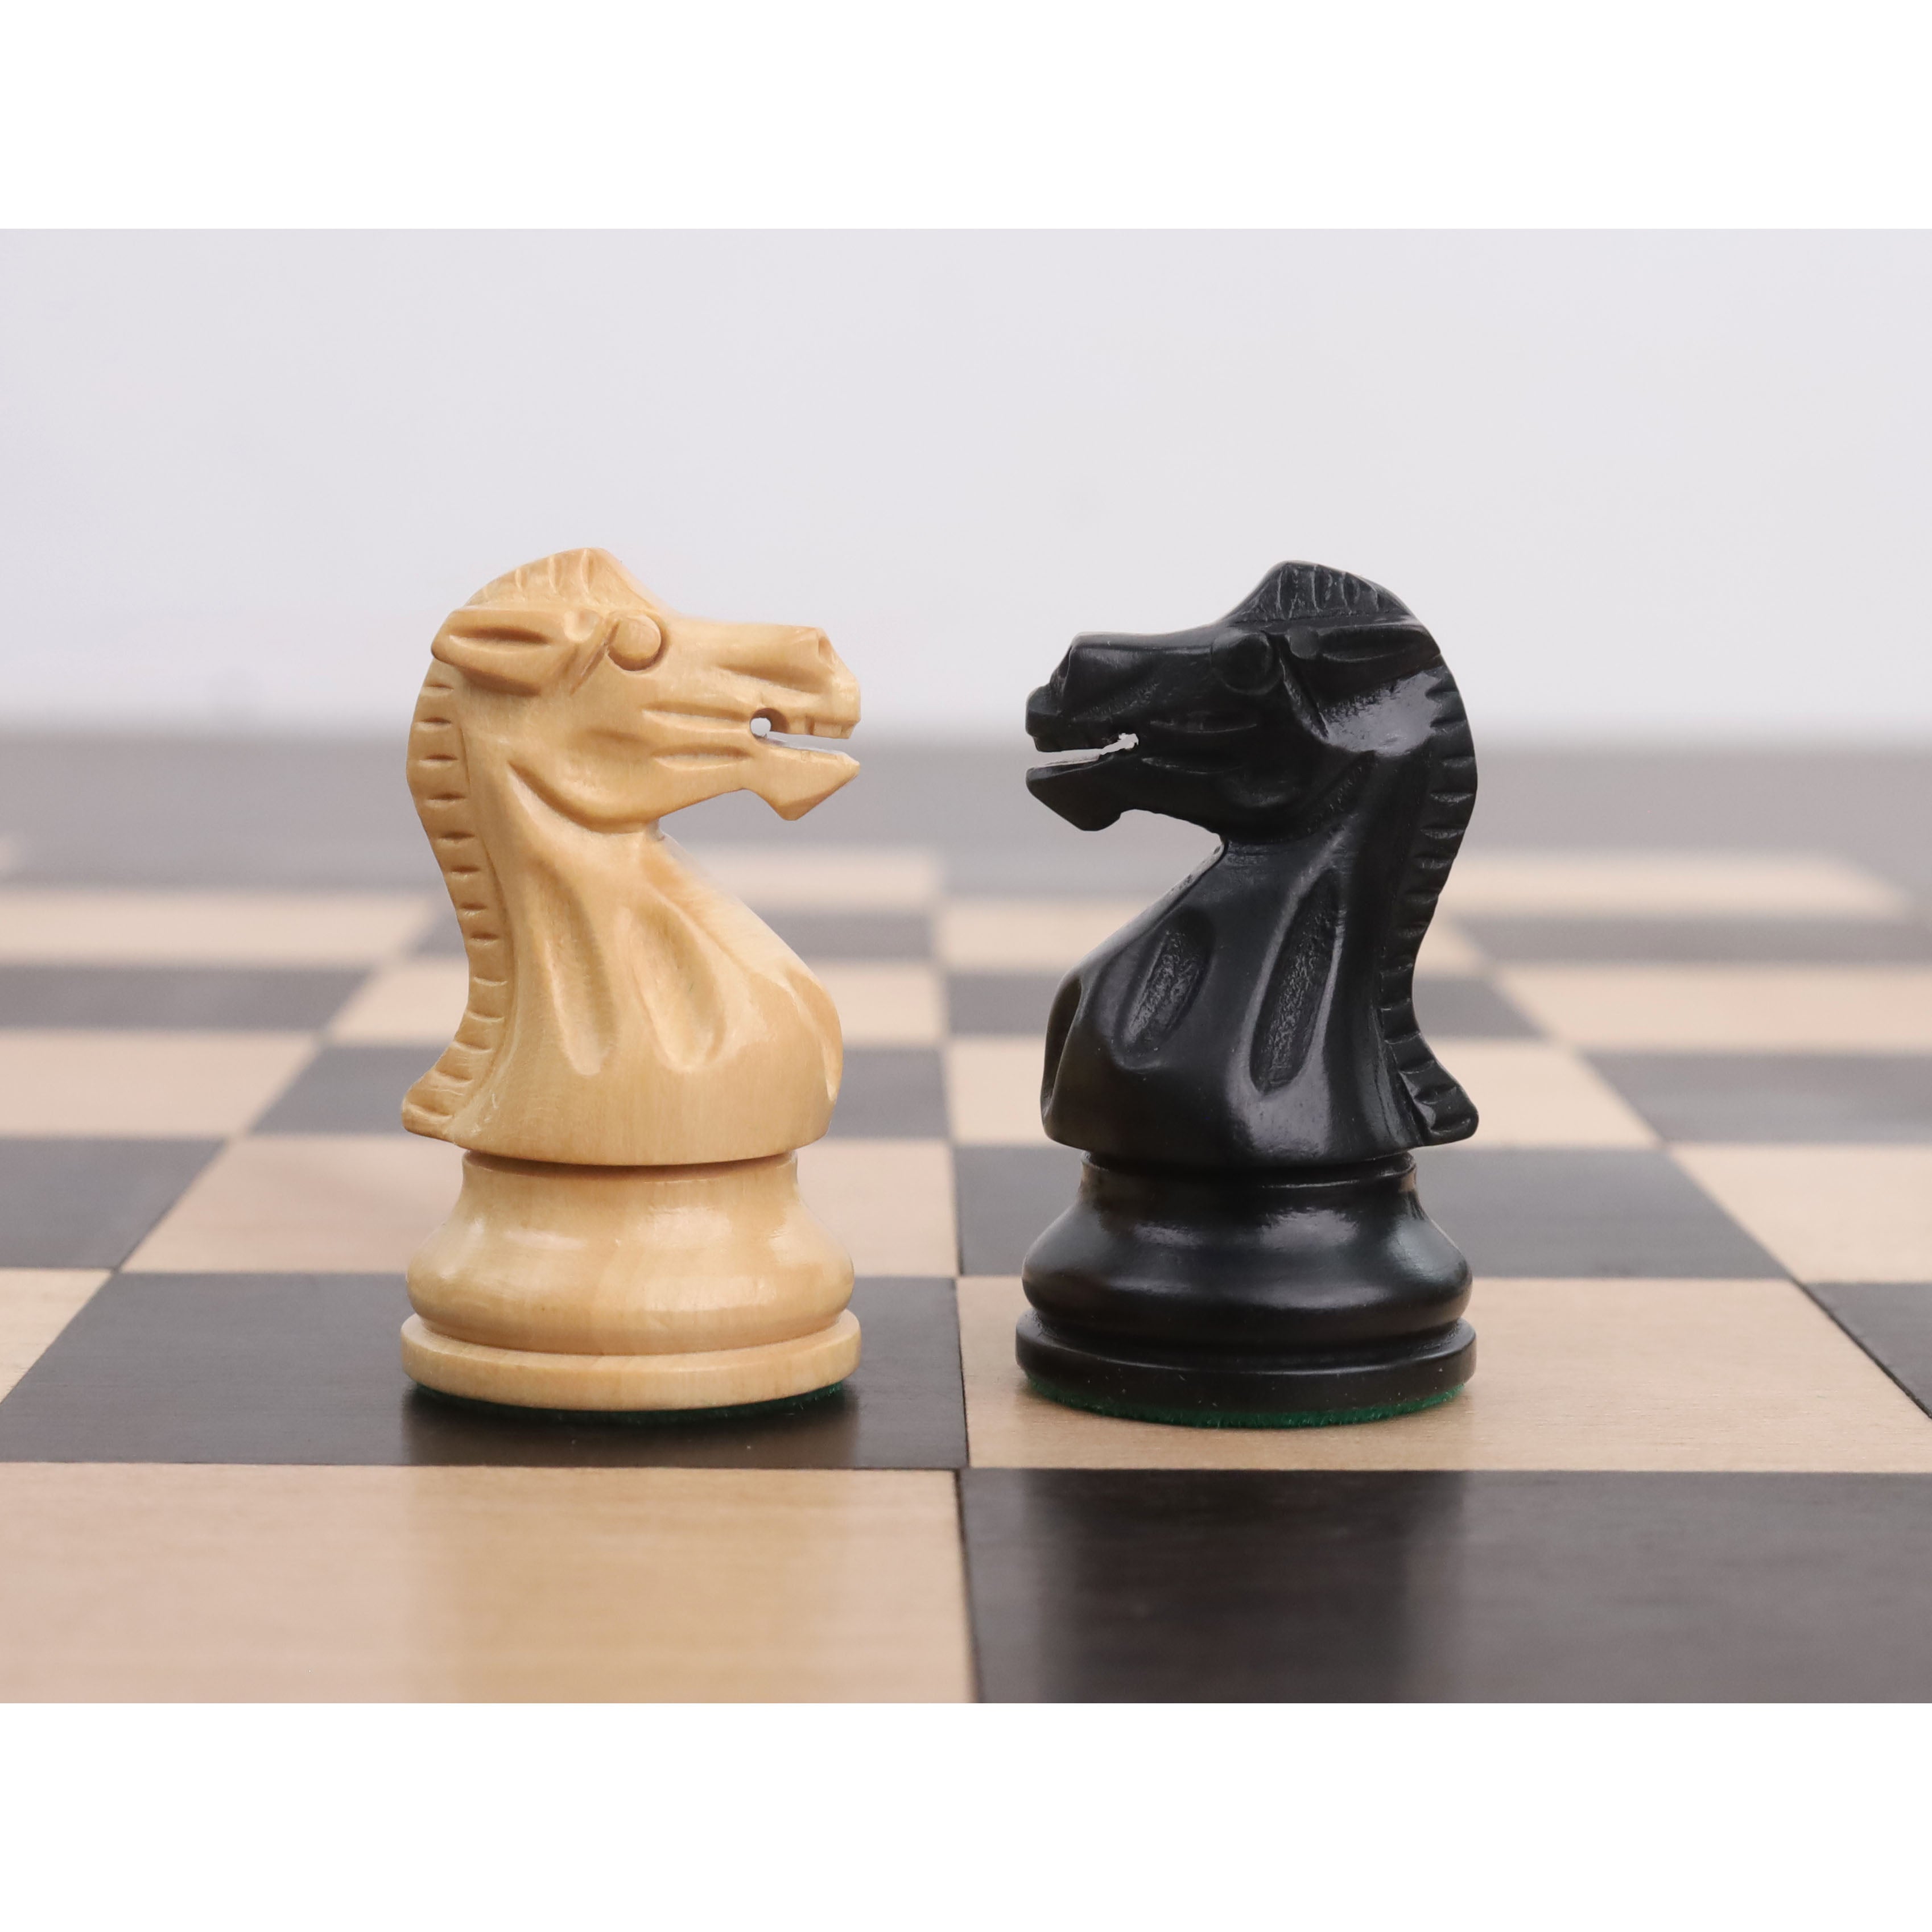 2.4" Pro Staunton Weighted Wooden Chess Set- Chess Pieces Only - Ebonised Boxwood